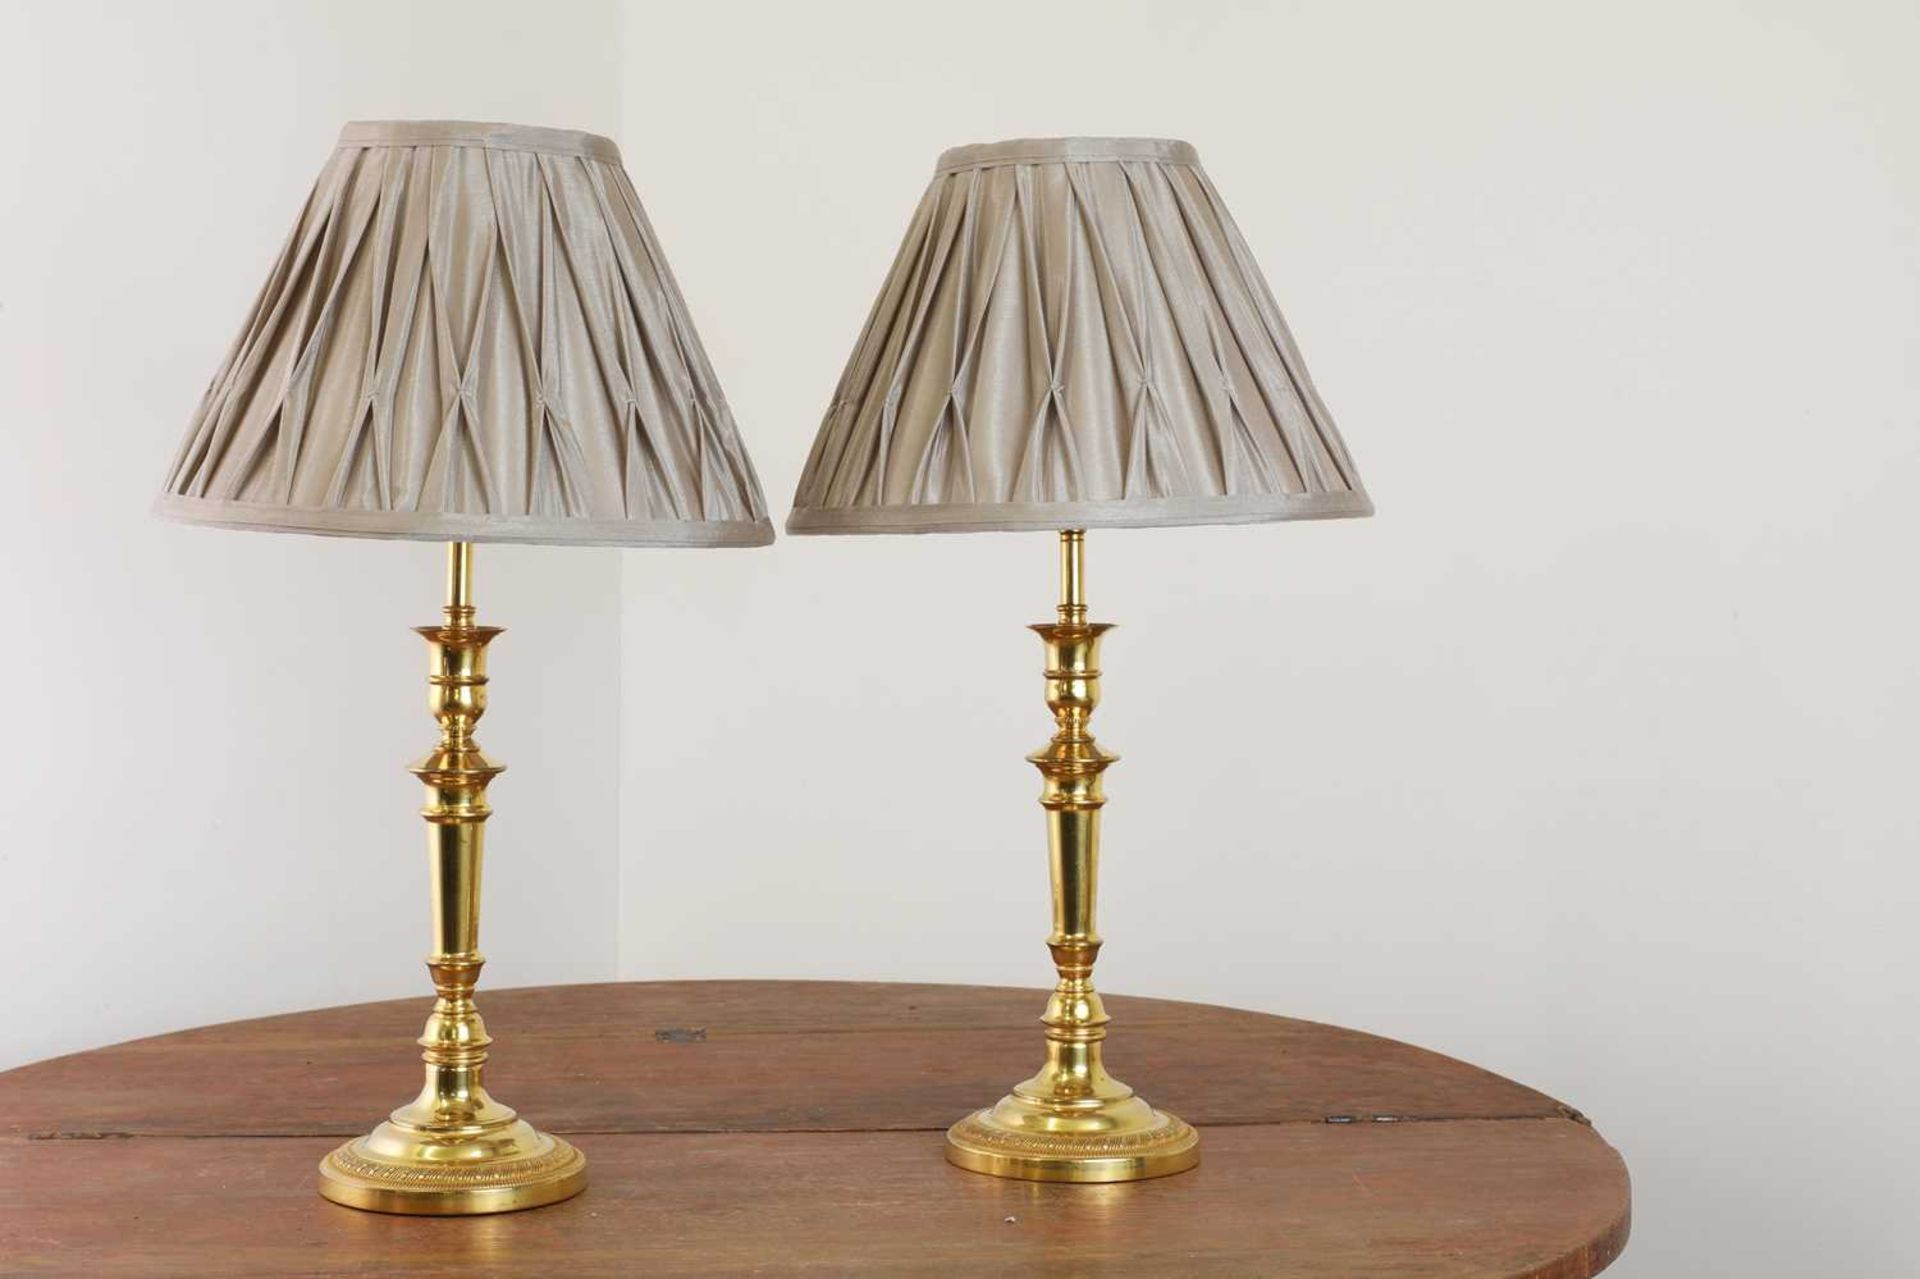 A pair of French Empire-style gilt-brass table lamps,